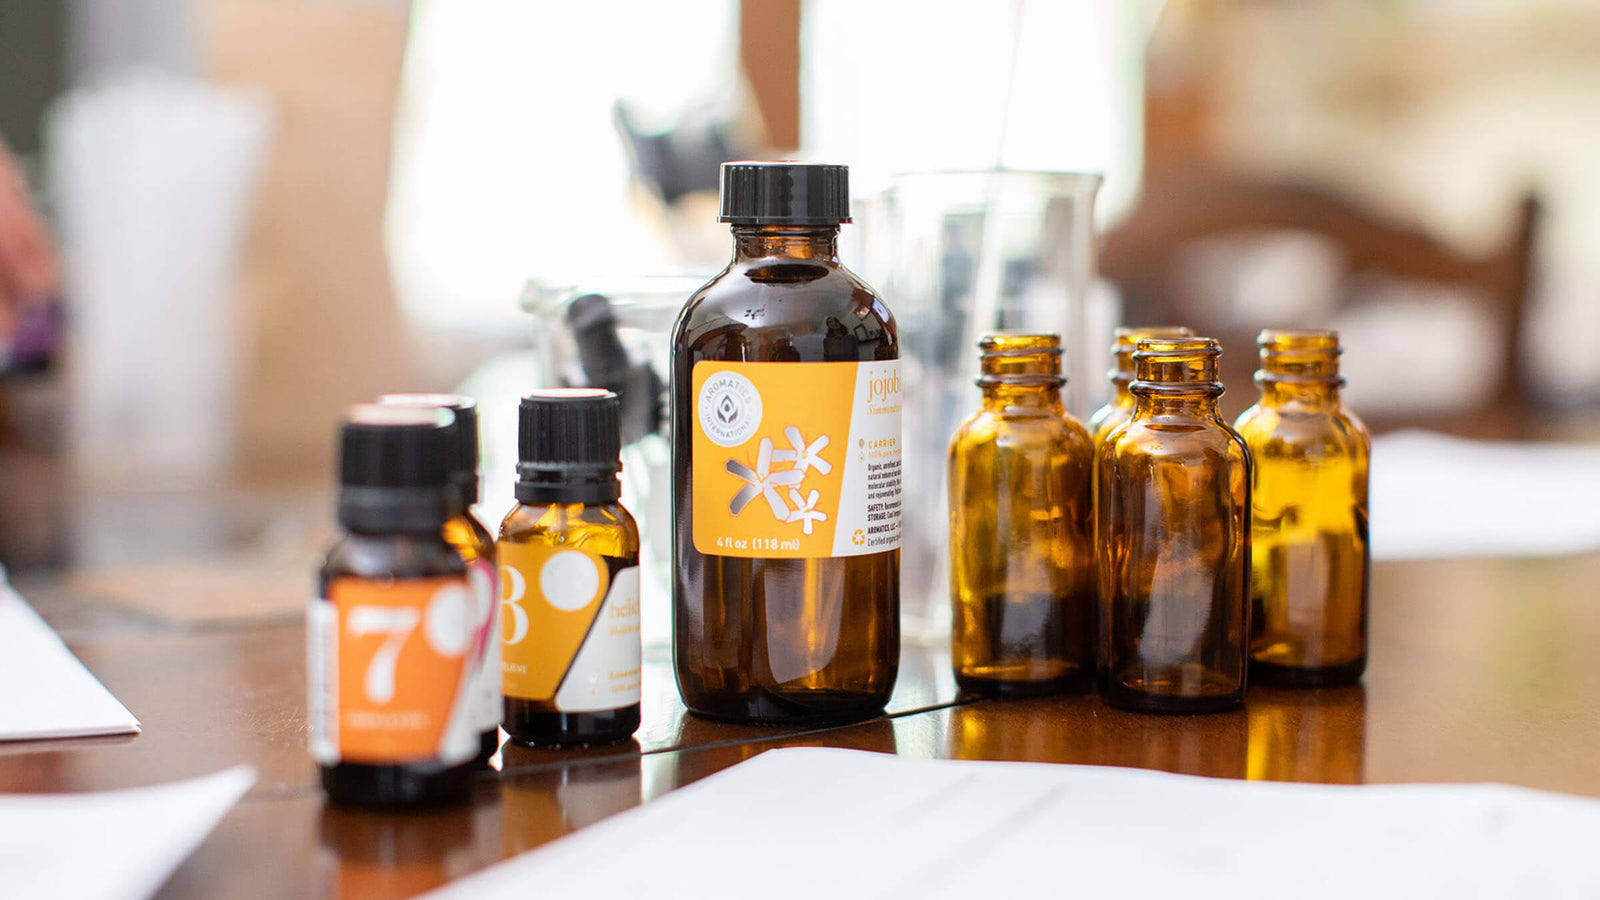 Blending essential oils based on chemical components